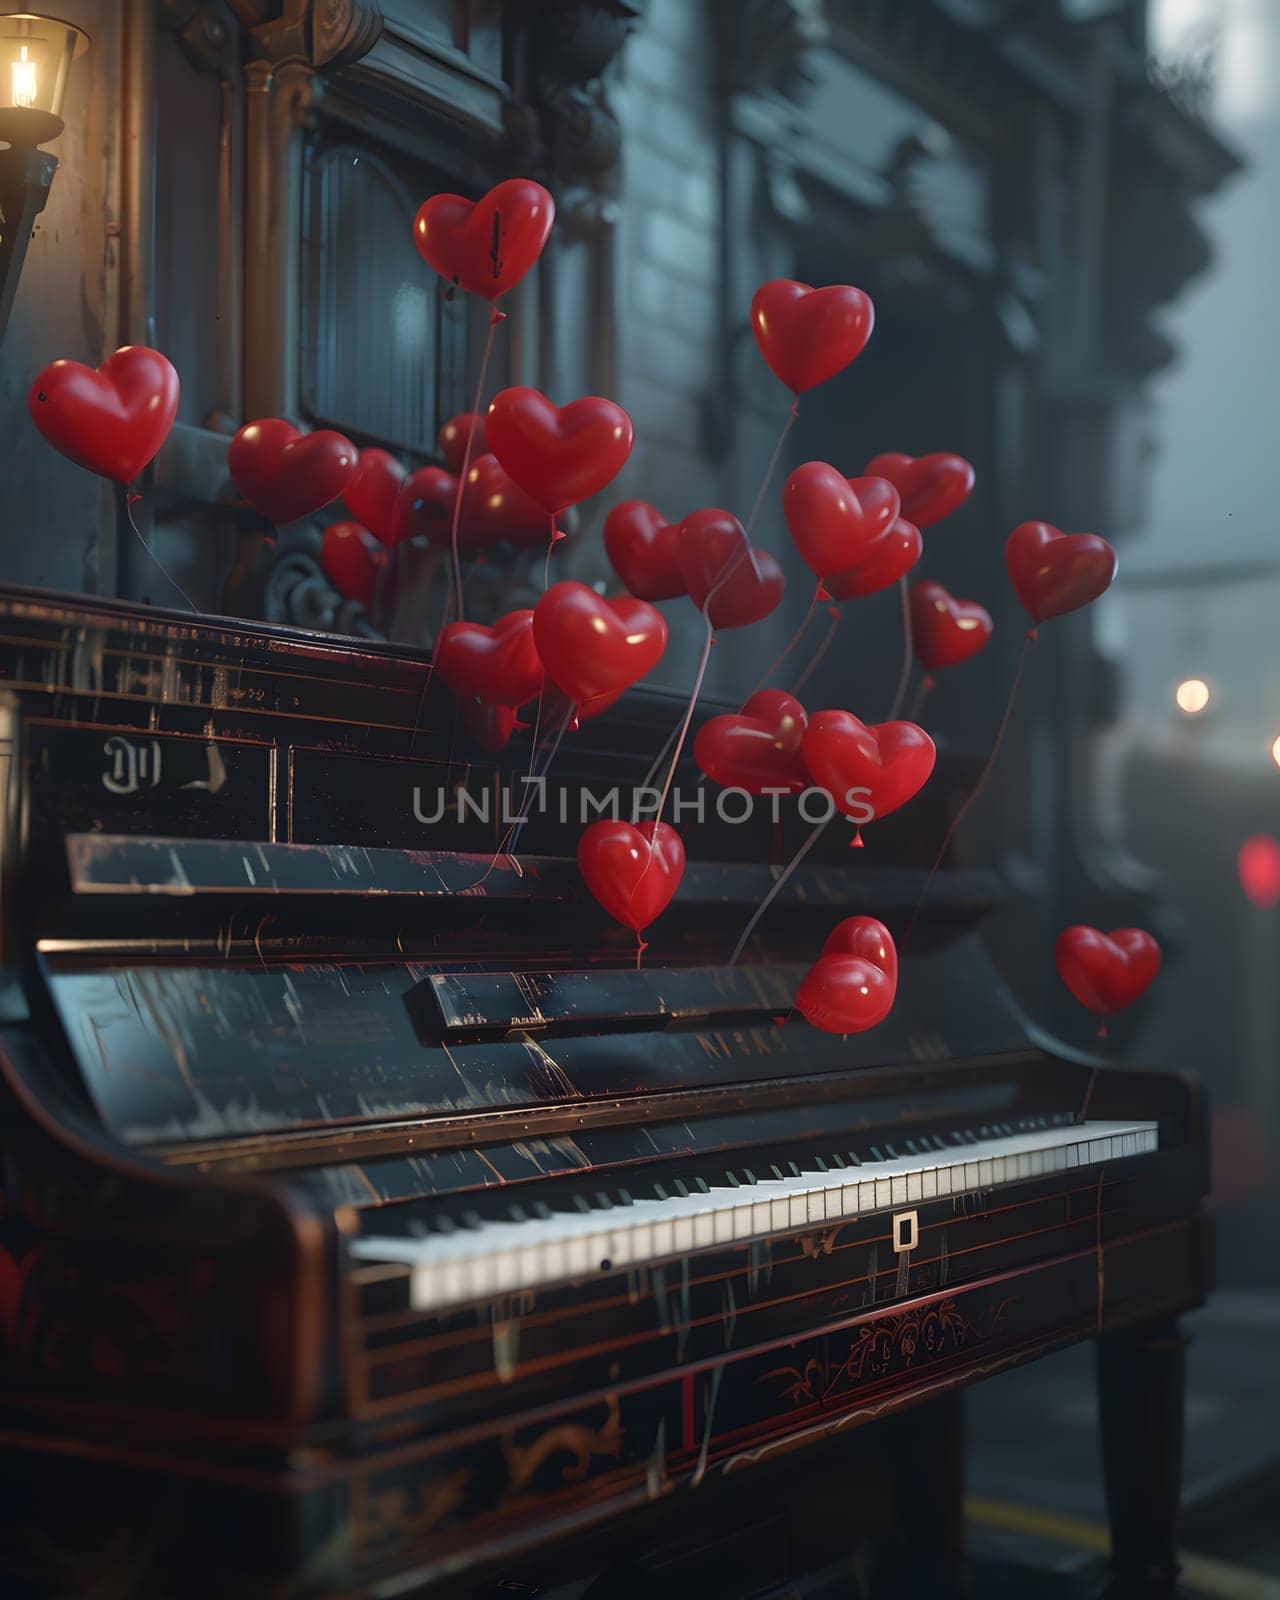 Musical instrument decorated with heartshaped balloon petals by Nadtochiy